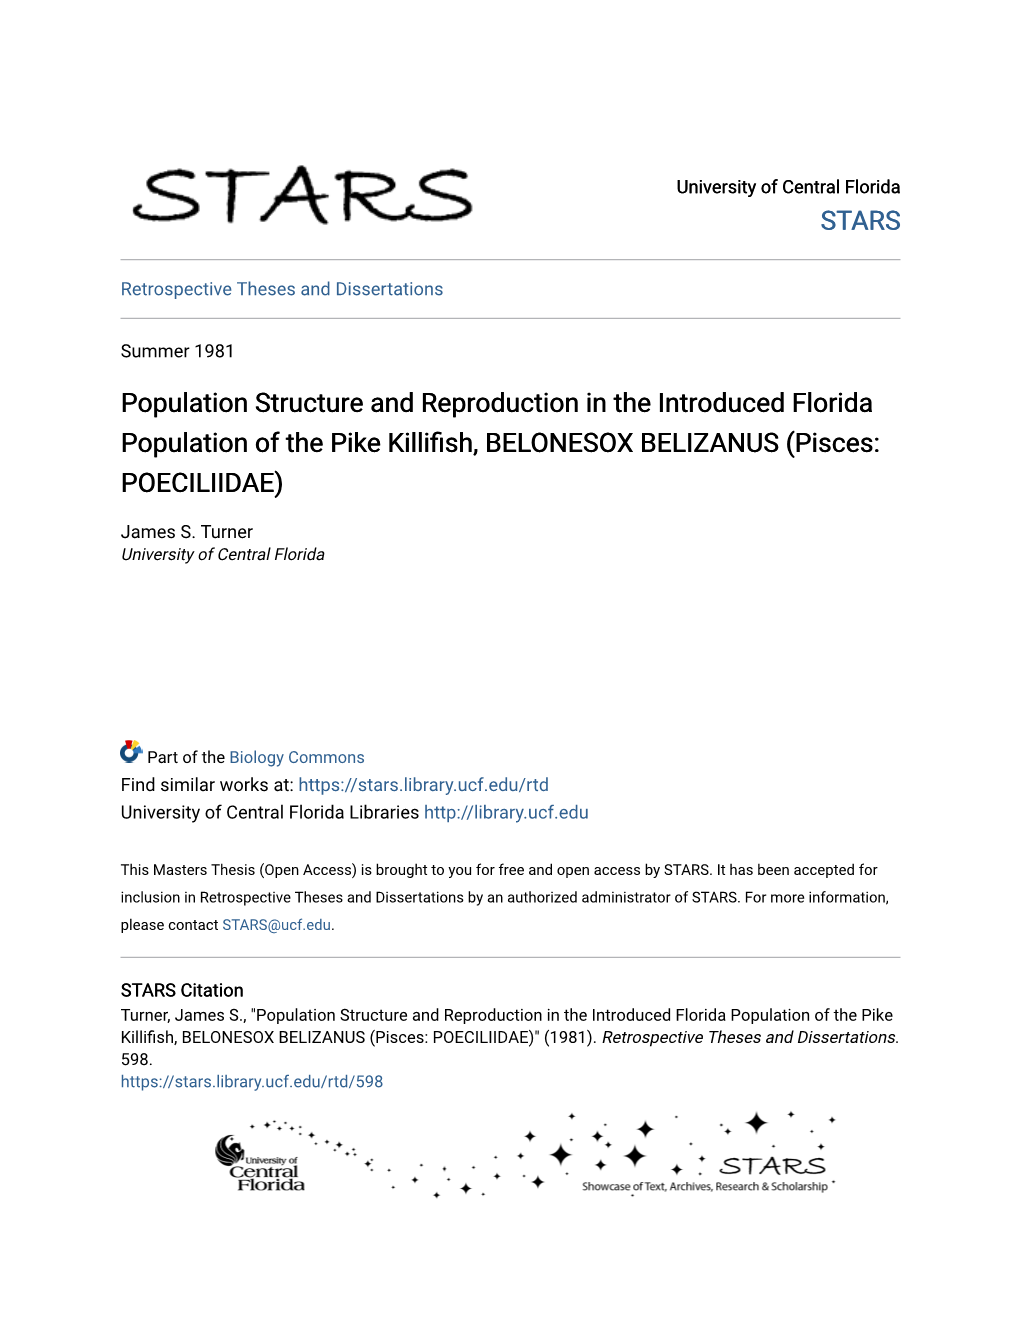 Population Structure and Reproduction in the Introduced Florida Population of the Pike Killifish, BELONESOX BELIZANUS (Pisces: POECILIIDAE)